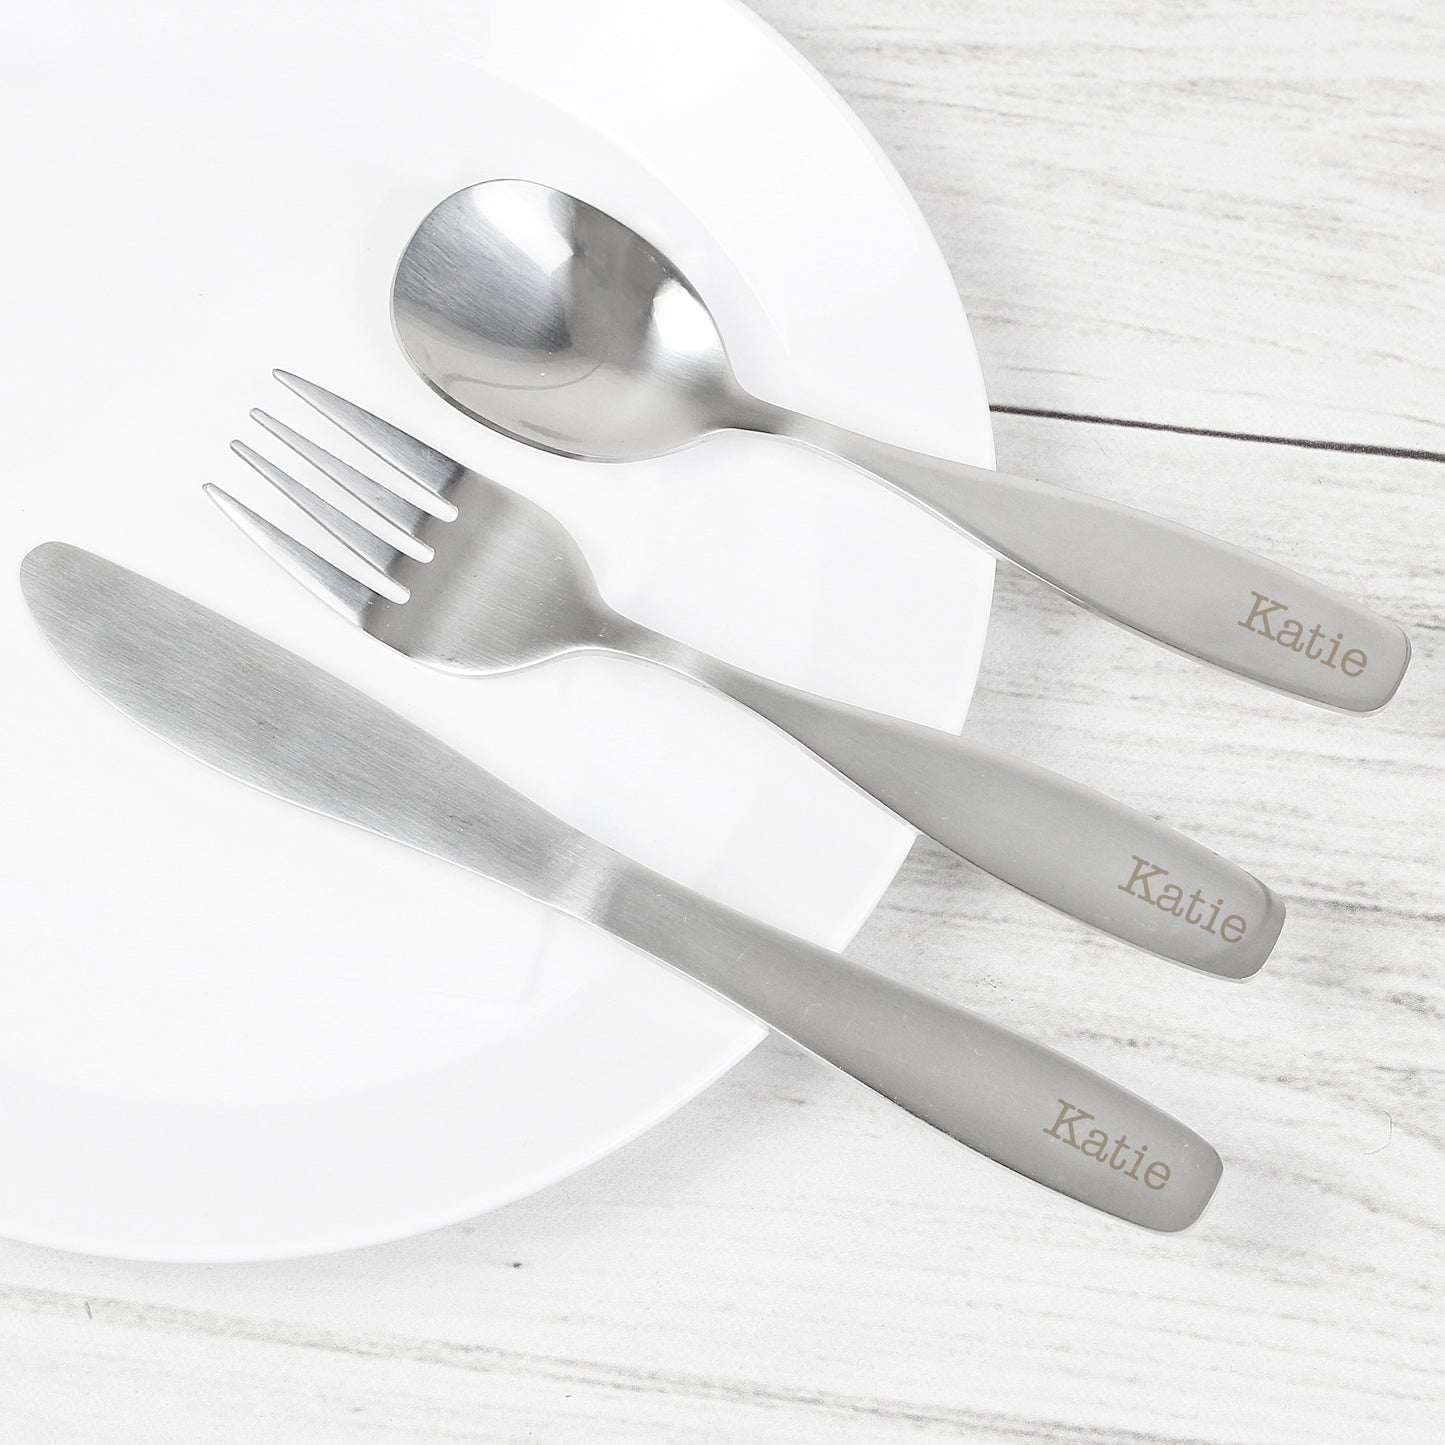 3 Piece Cutlery Set - Lilybet loves